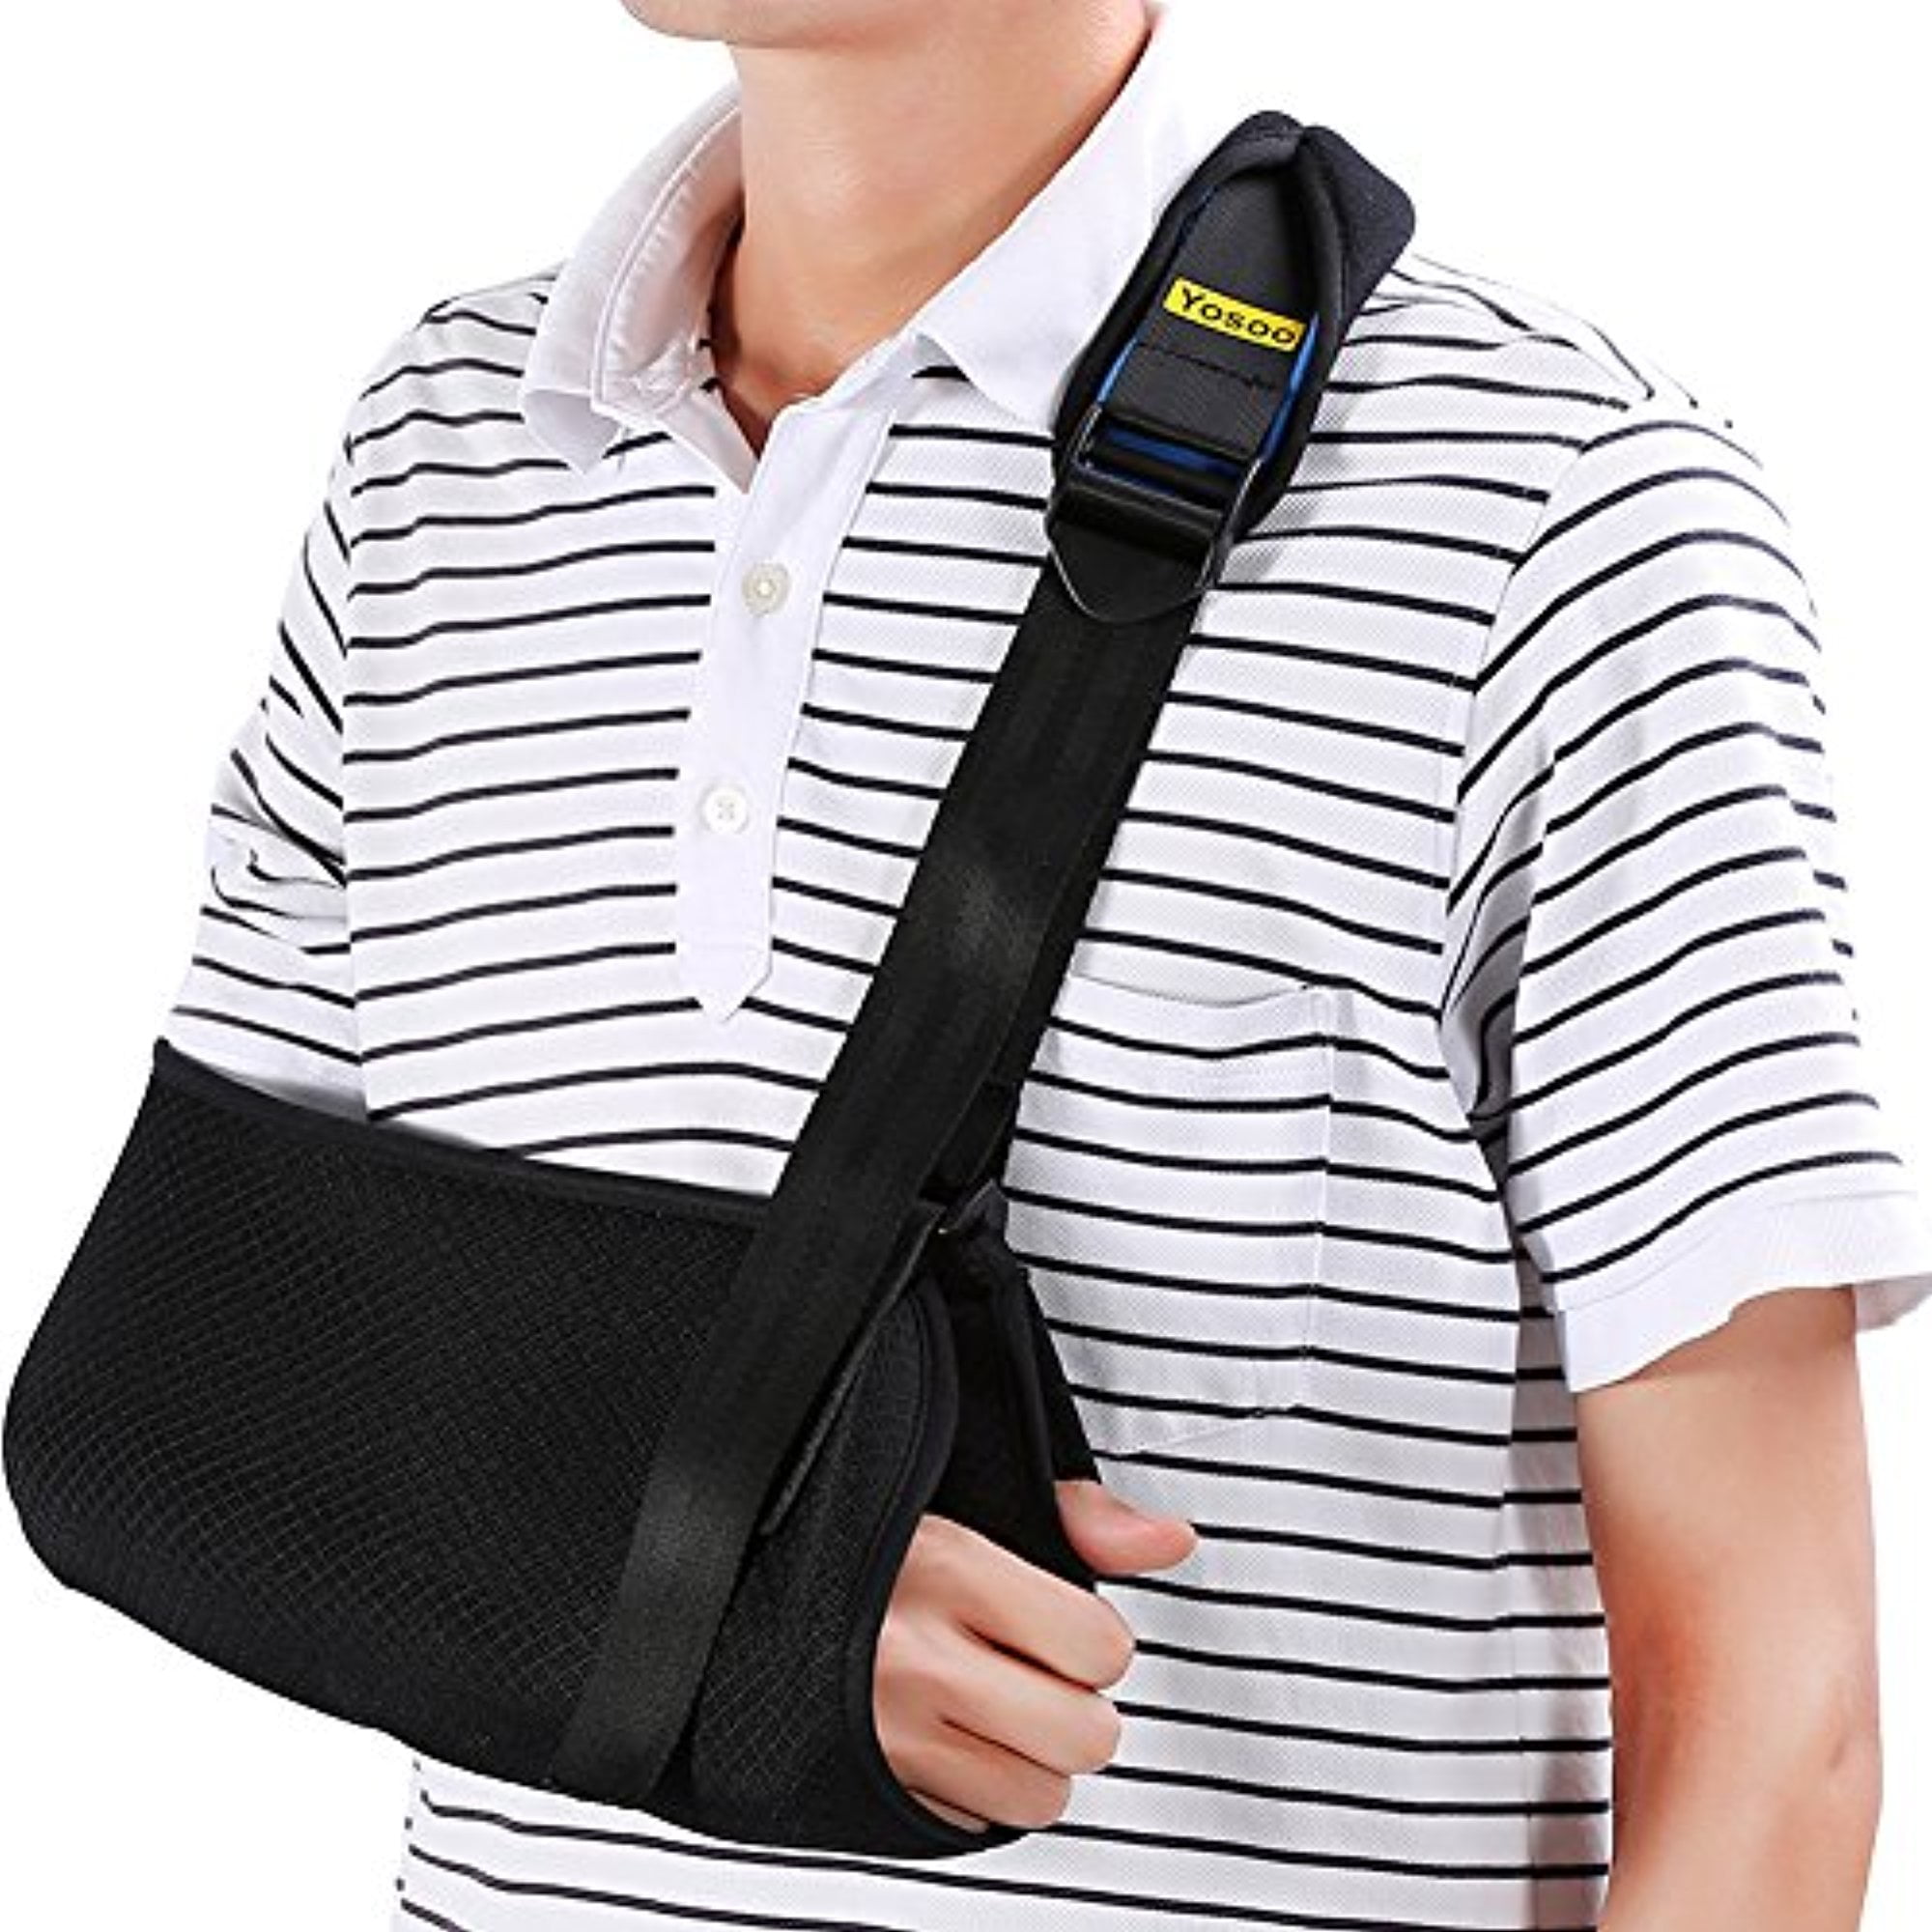 Collection 96+ Pictures How To Put On A Sling For Broken Arm Updated